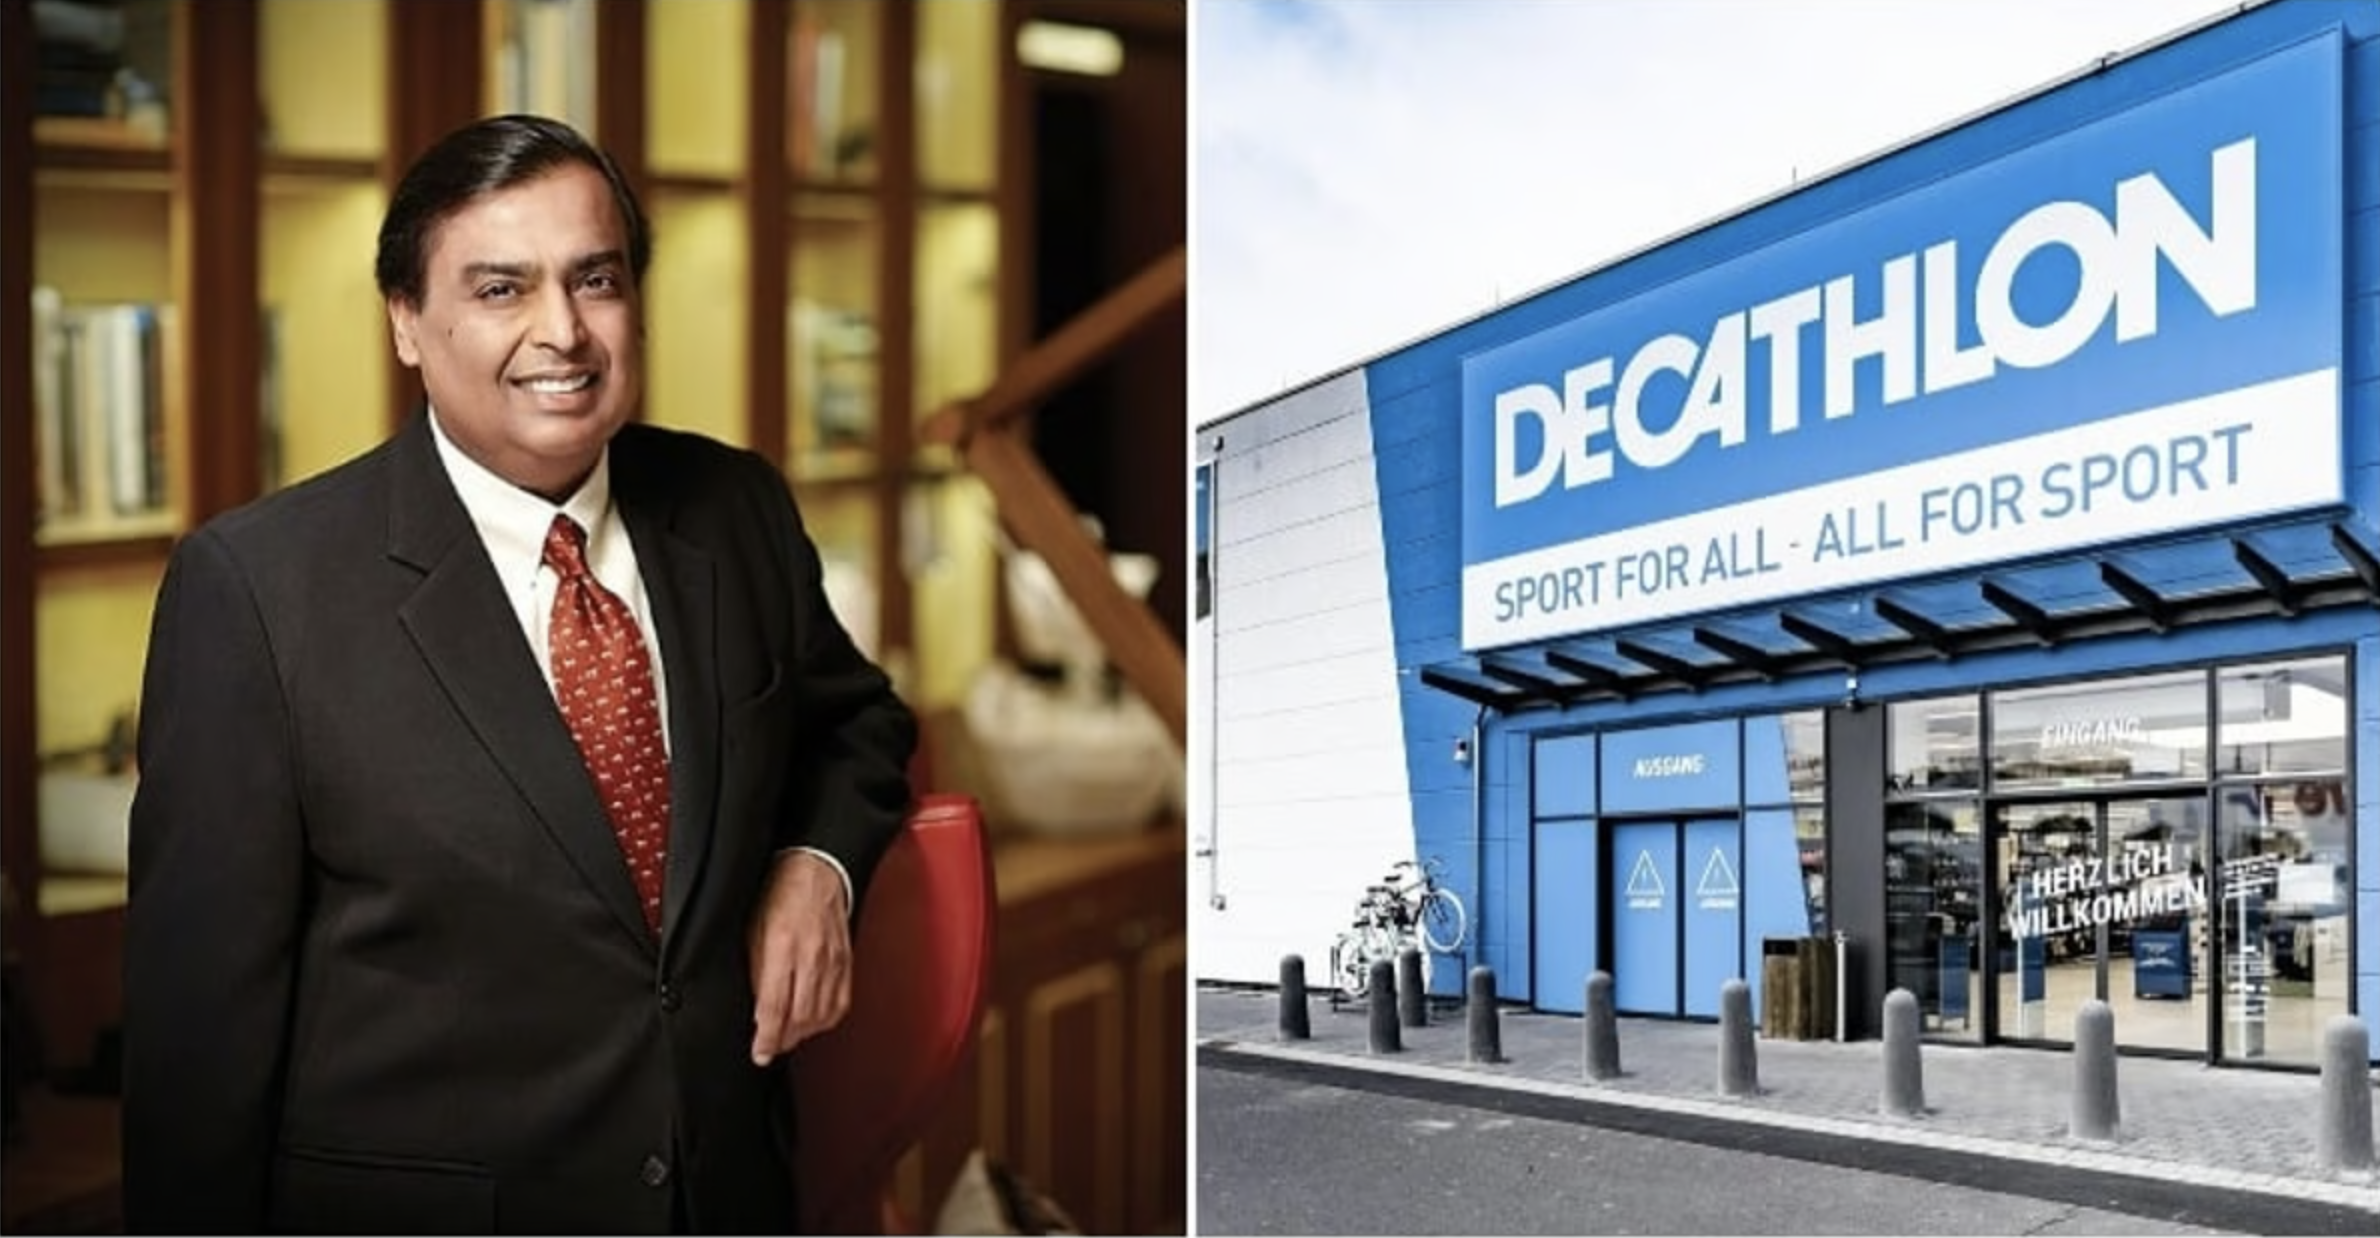 Reliance Will Launch 10,000 Sq Feet Sports-Focussed Retail Outlets To Challenge Decathlon In India